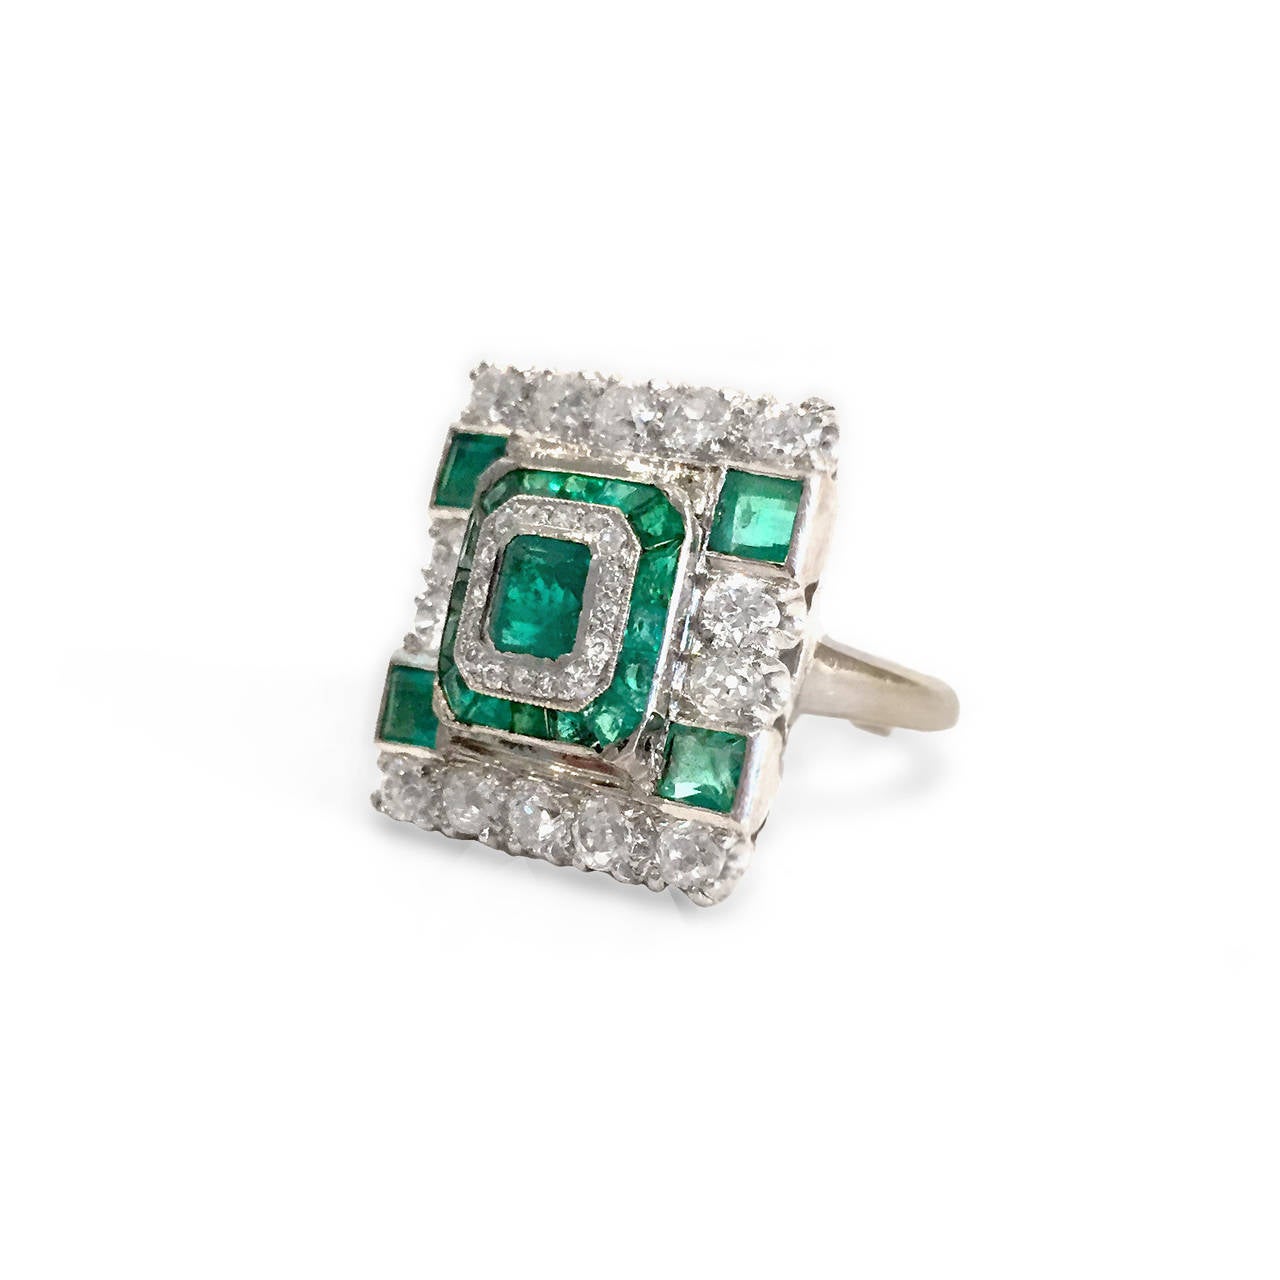 With its true-to-Art-Deco lines, this ring is a real eye-catcher. 14k white gold setting surrounds approximately 2 carats in round-cut diamonds and 1.25 carats of princess-cut emeralds, in a classic geometric configuration. 5/8 inch long. Currently